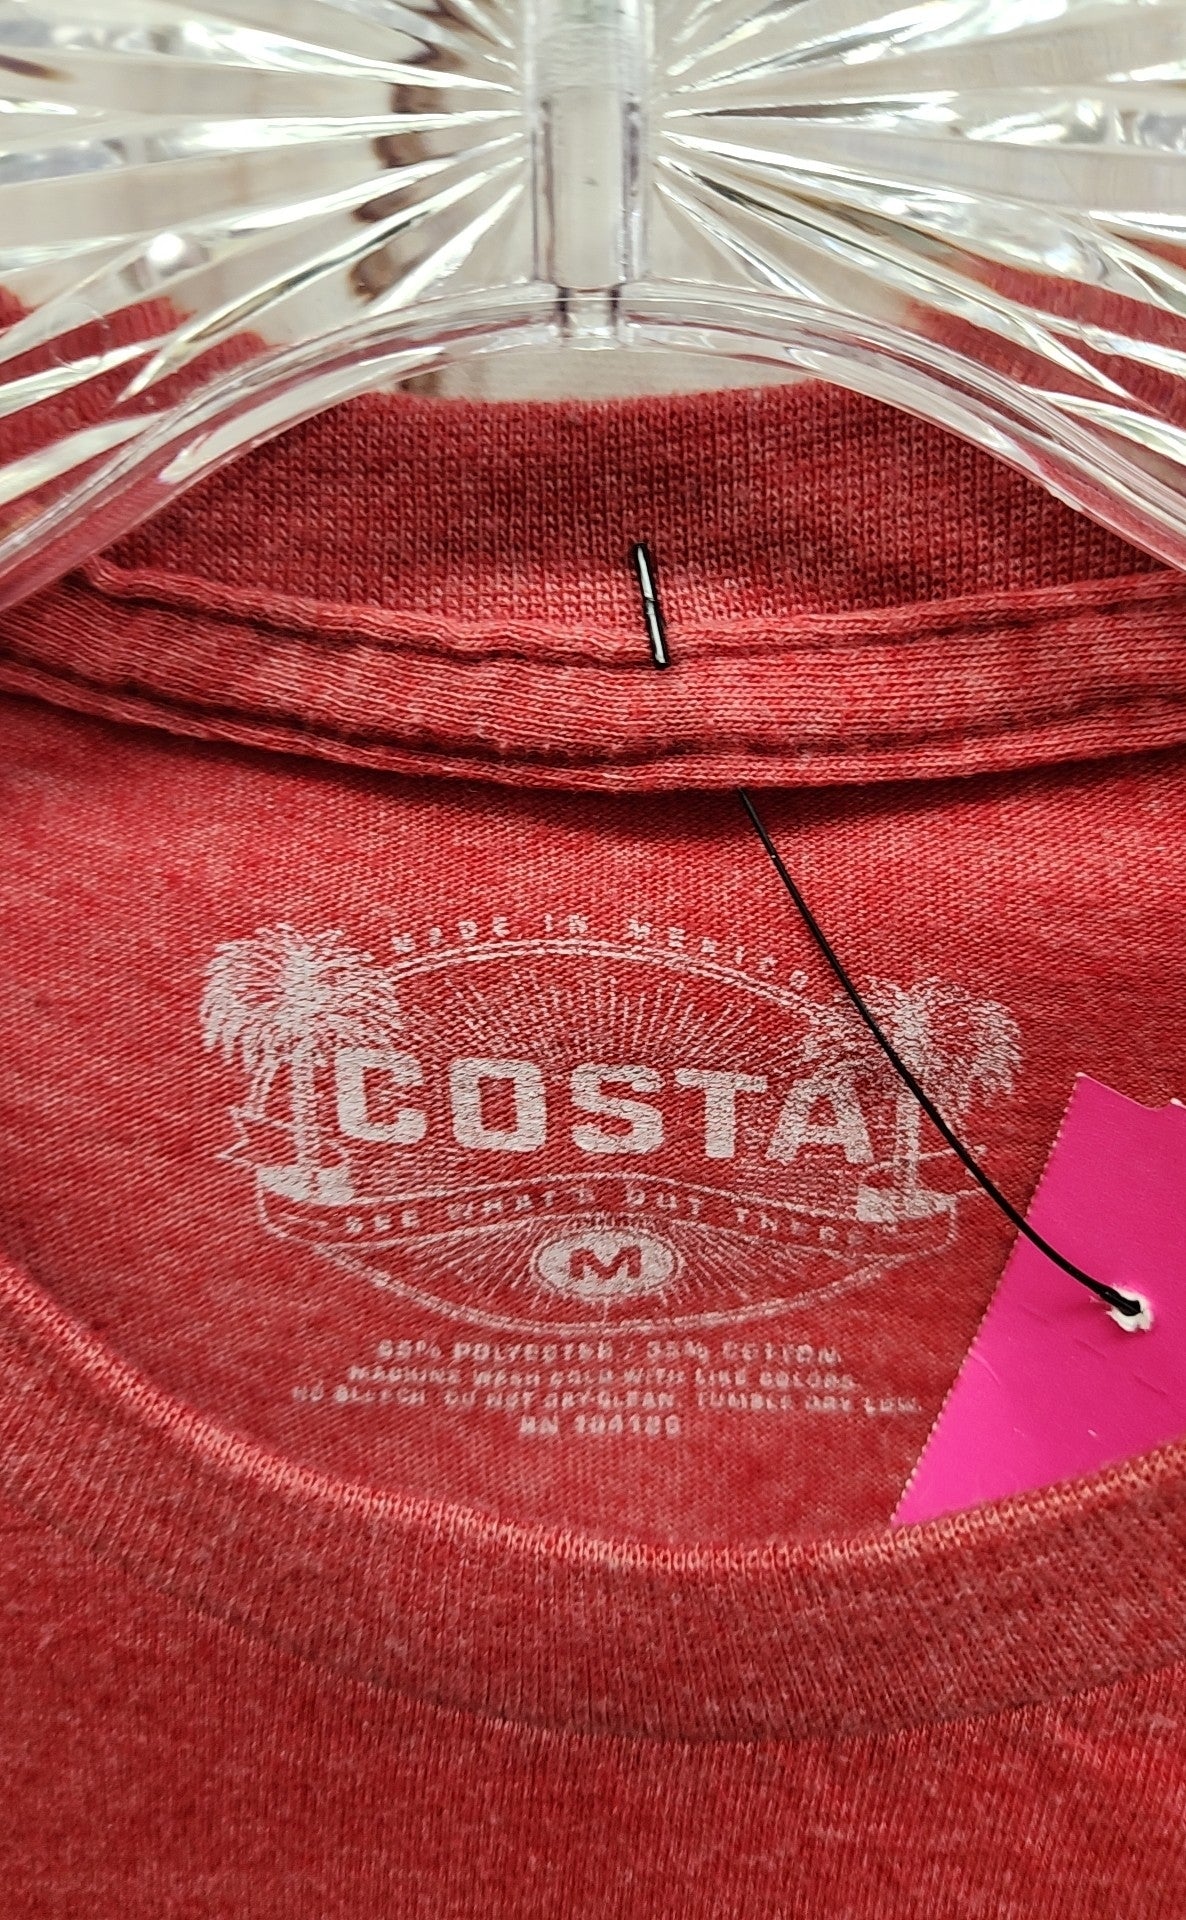 Costa Men's Size M Red Shirt